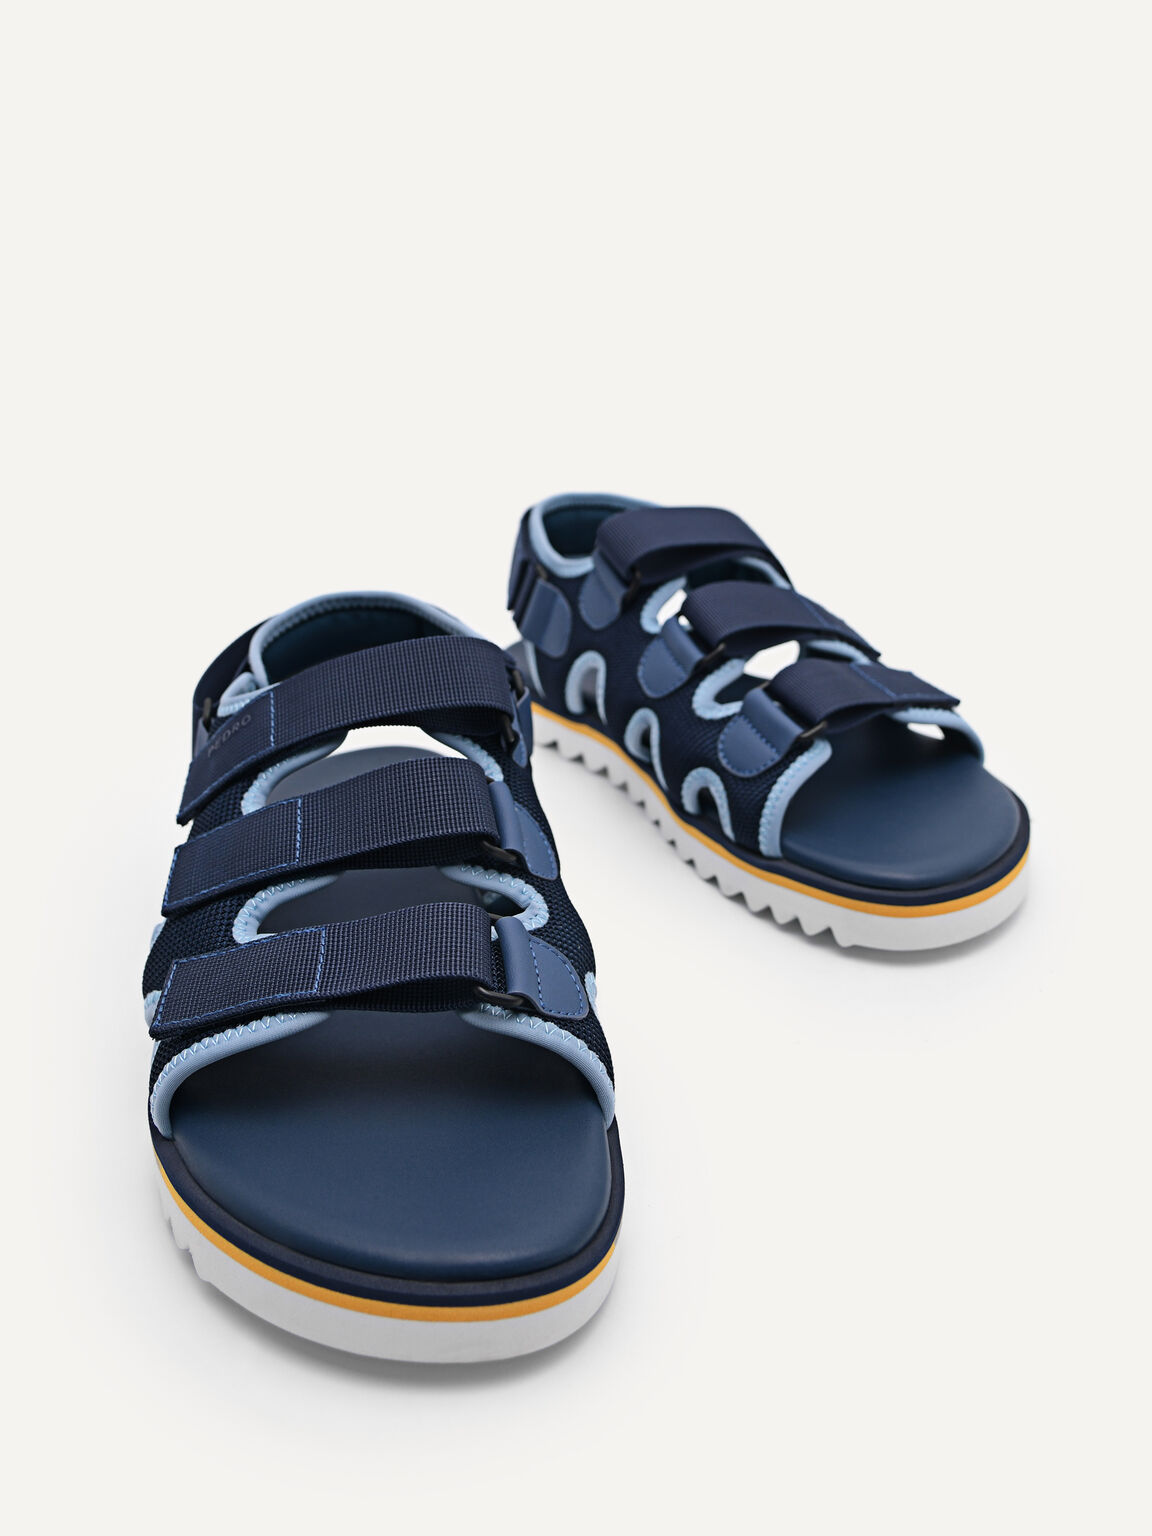 Contrasting Technical Sandals, Navy